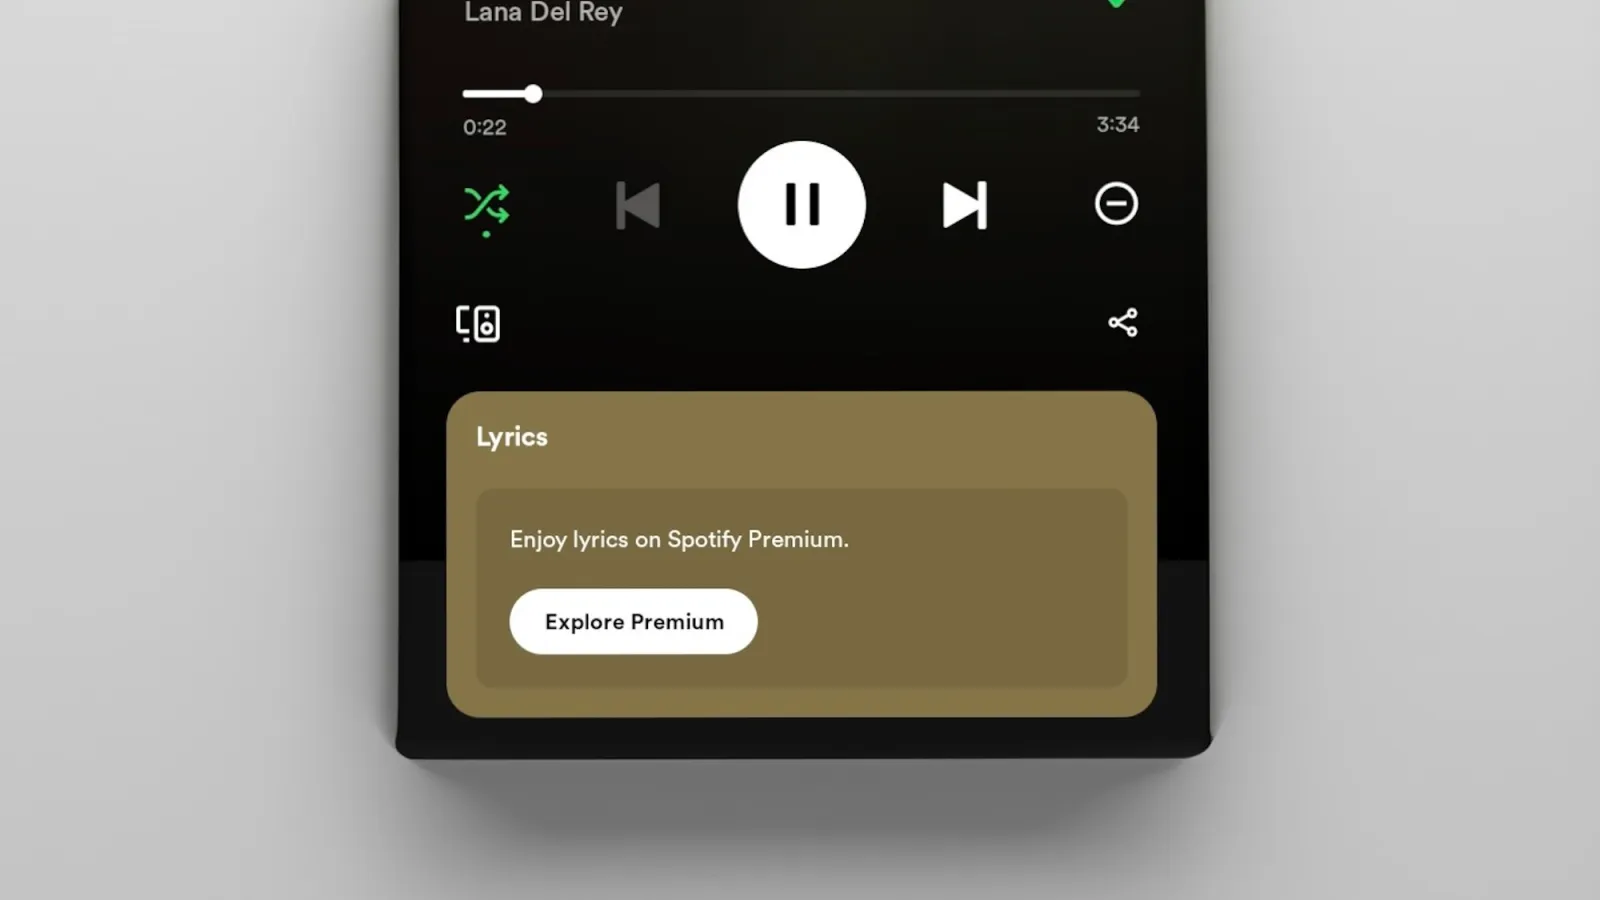 You may soon need to pay for Spotify lyrics